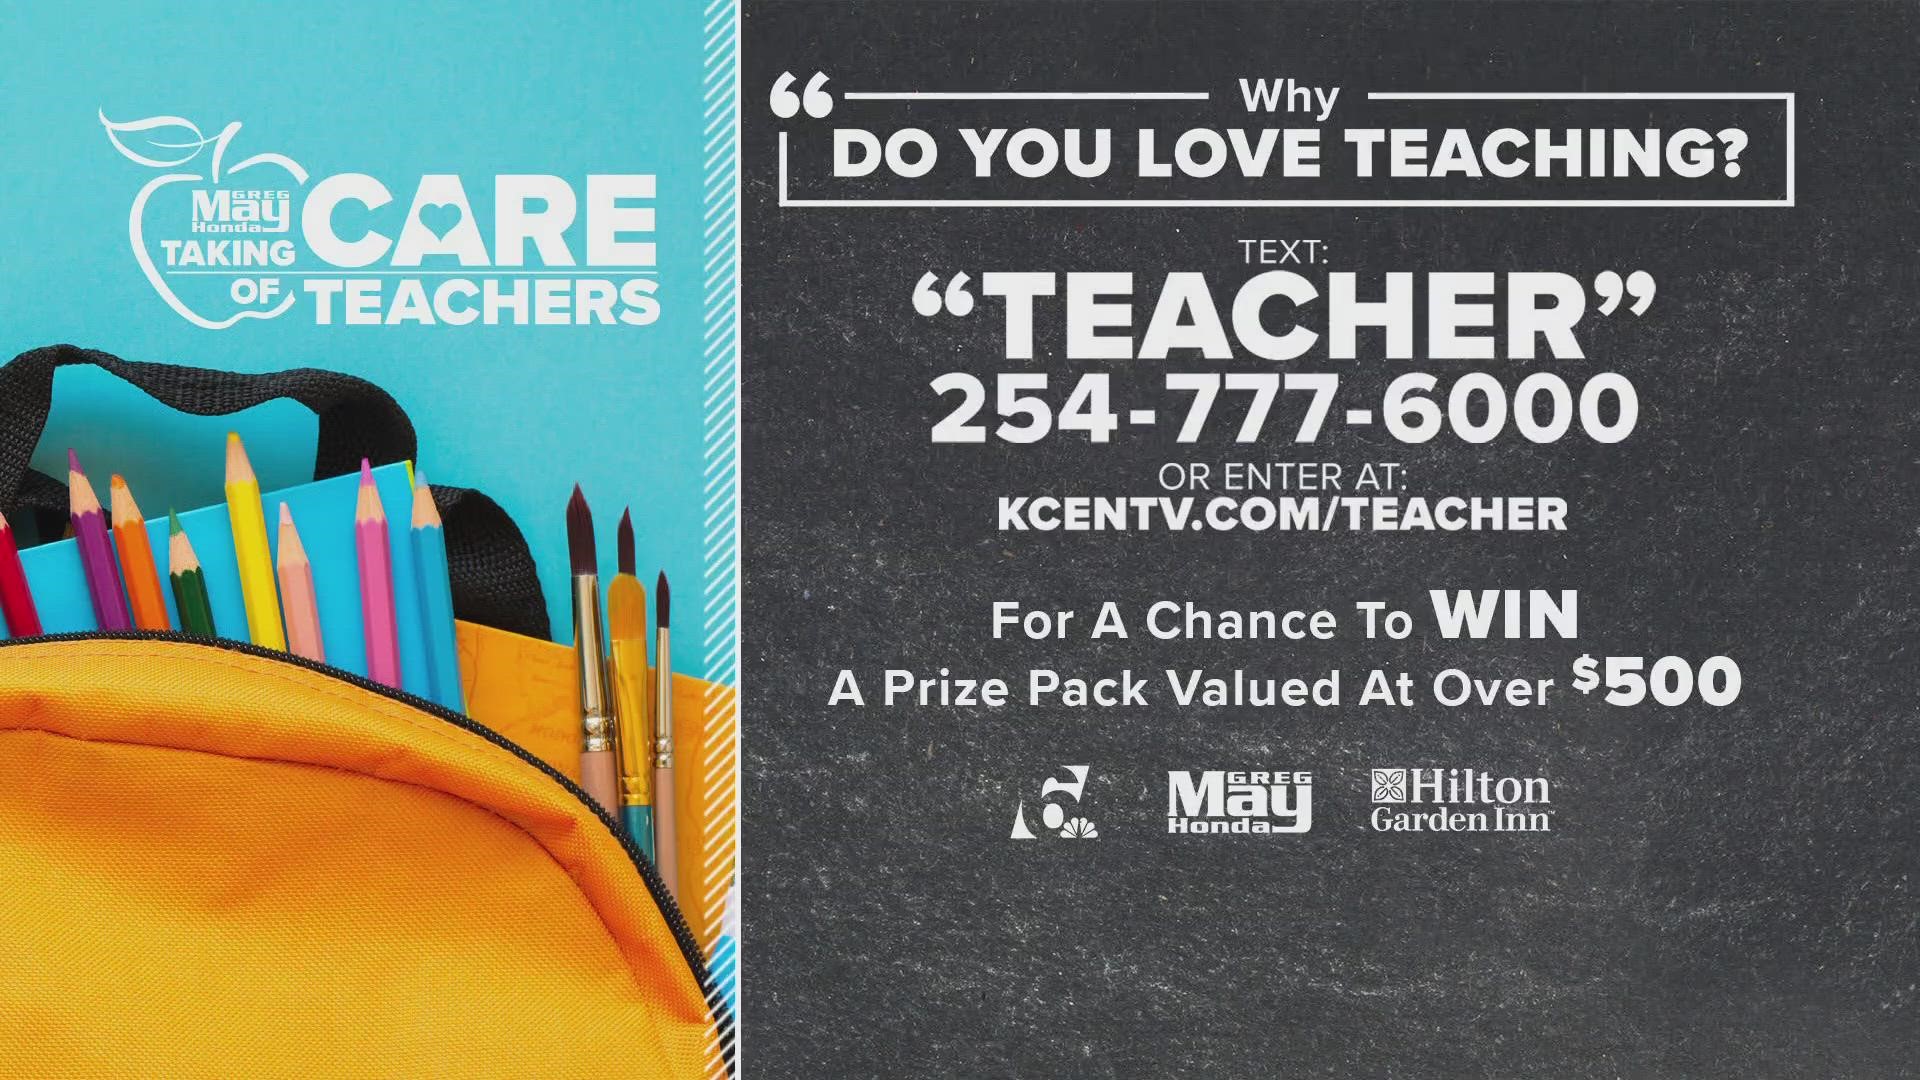 One lucky teacher will win an overnight stay at Hilton Garden Inn. Just let us know what you love about teaching!